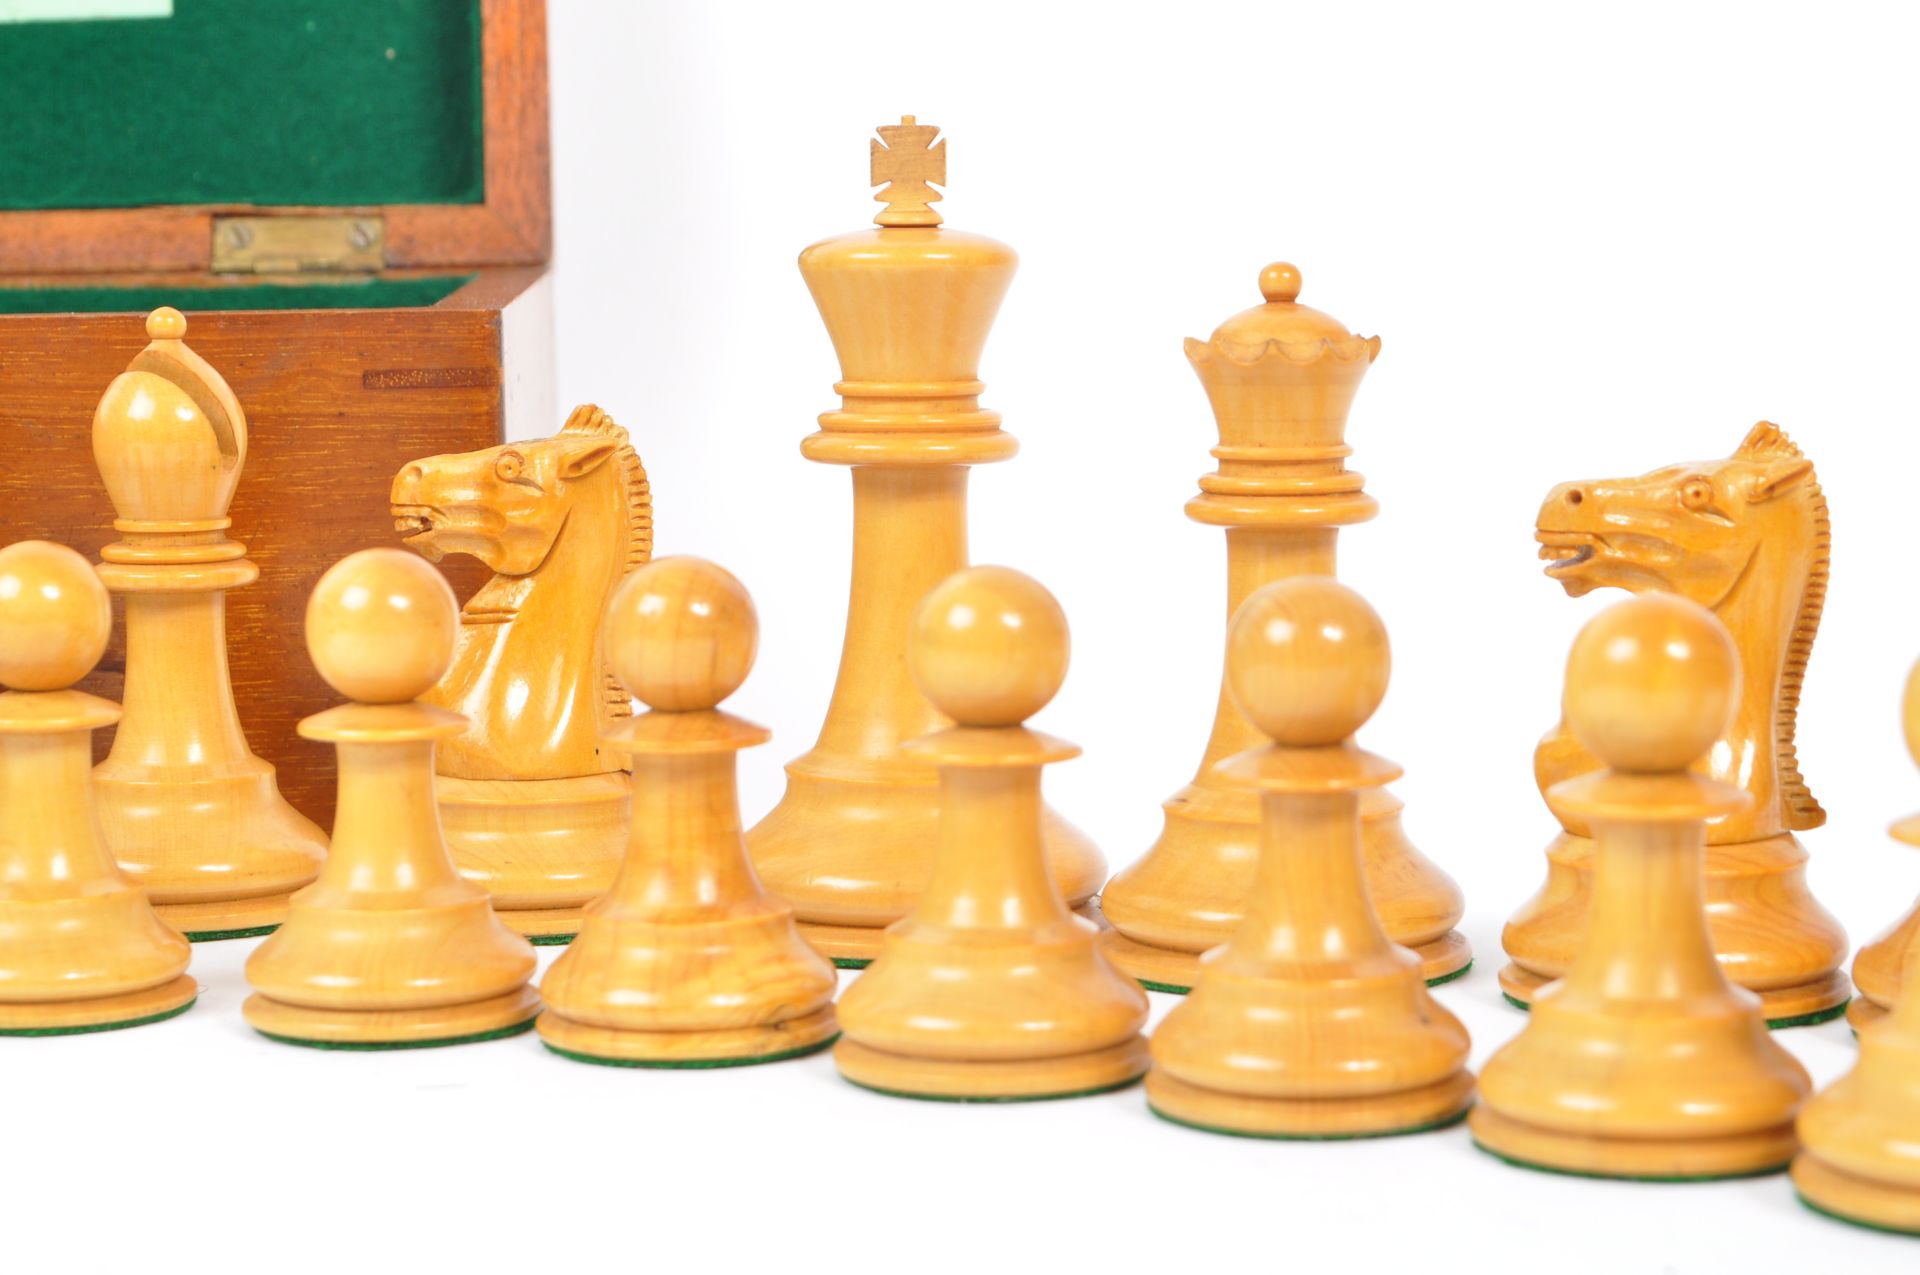 J. JAQUES & SON - EARLY 20TH CENTURY CHESS SET - Image 5 of 10